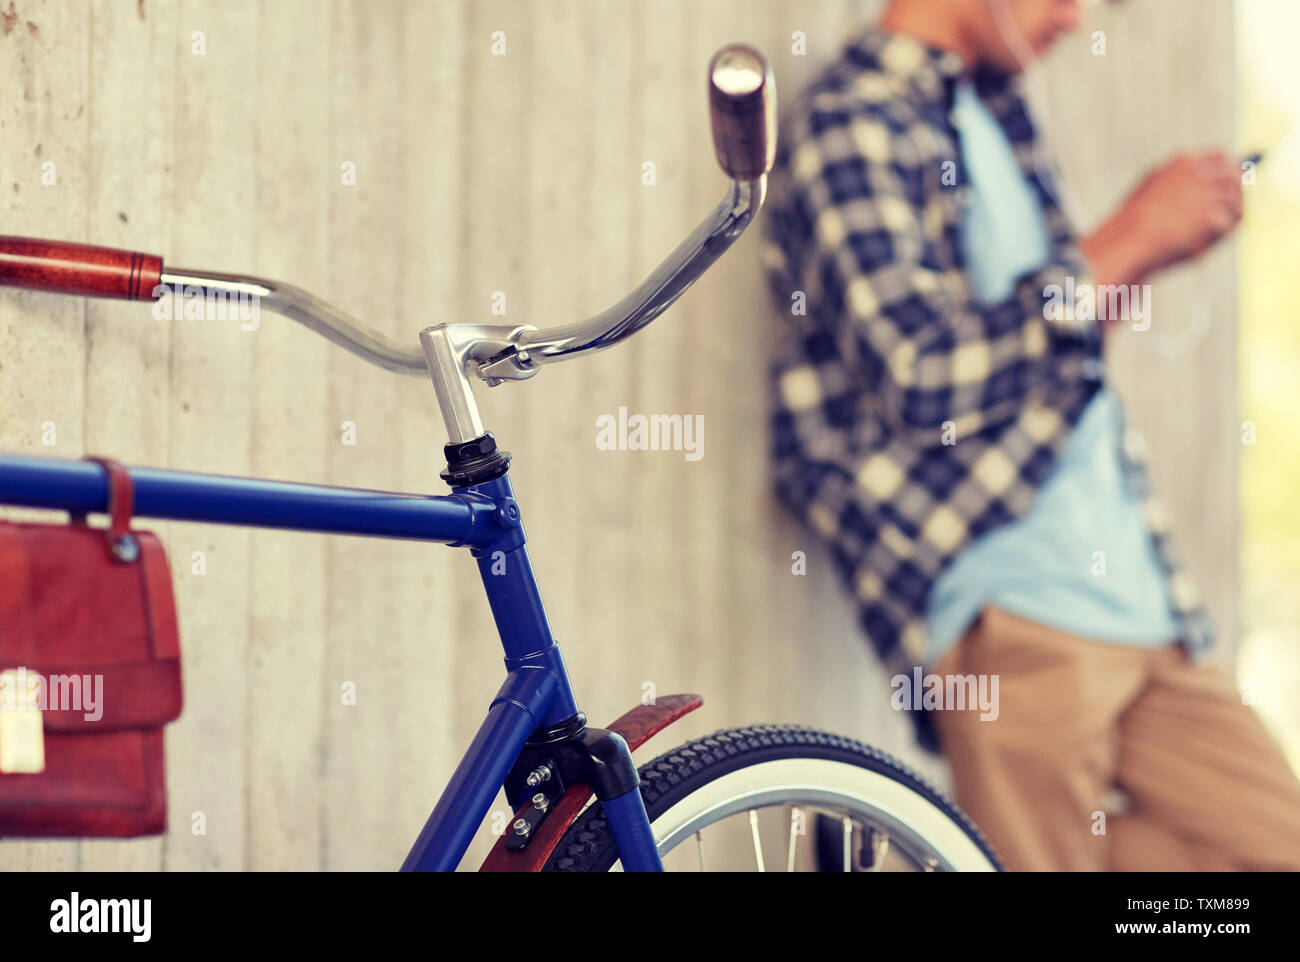 man with fixed gear bicycle on street Stock Photo